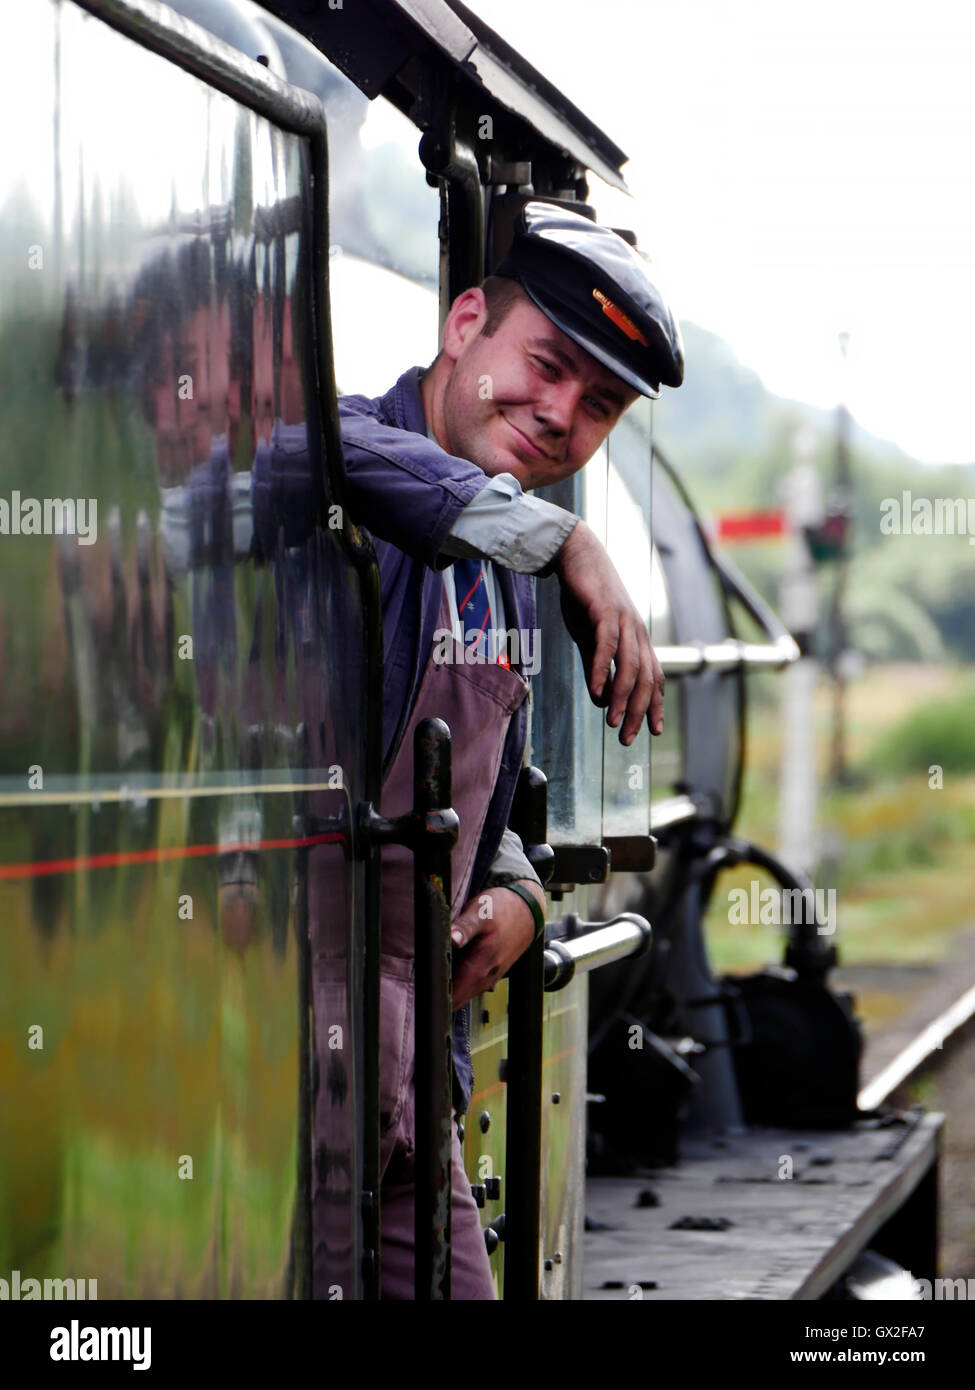 Engineer on a steam train at Goathland railway station Aidensfield North Yorkshire Moors England United Kingdom UK Great Britain Stock Photo